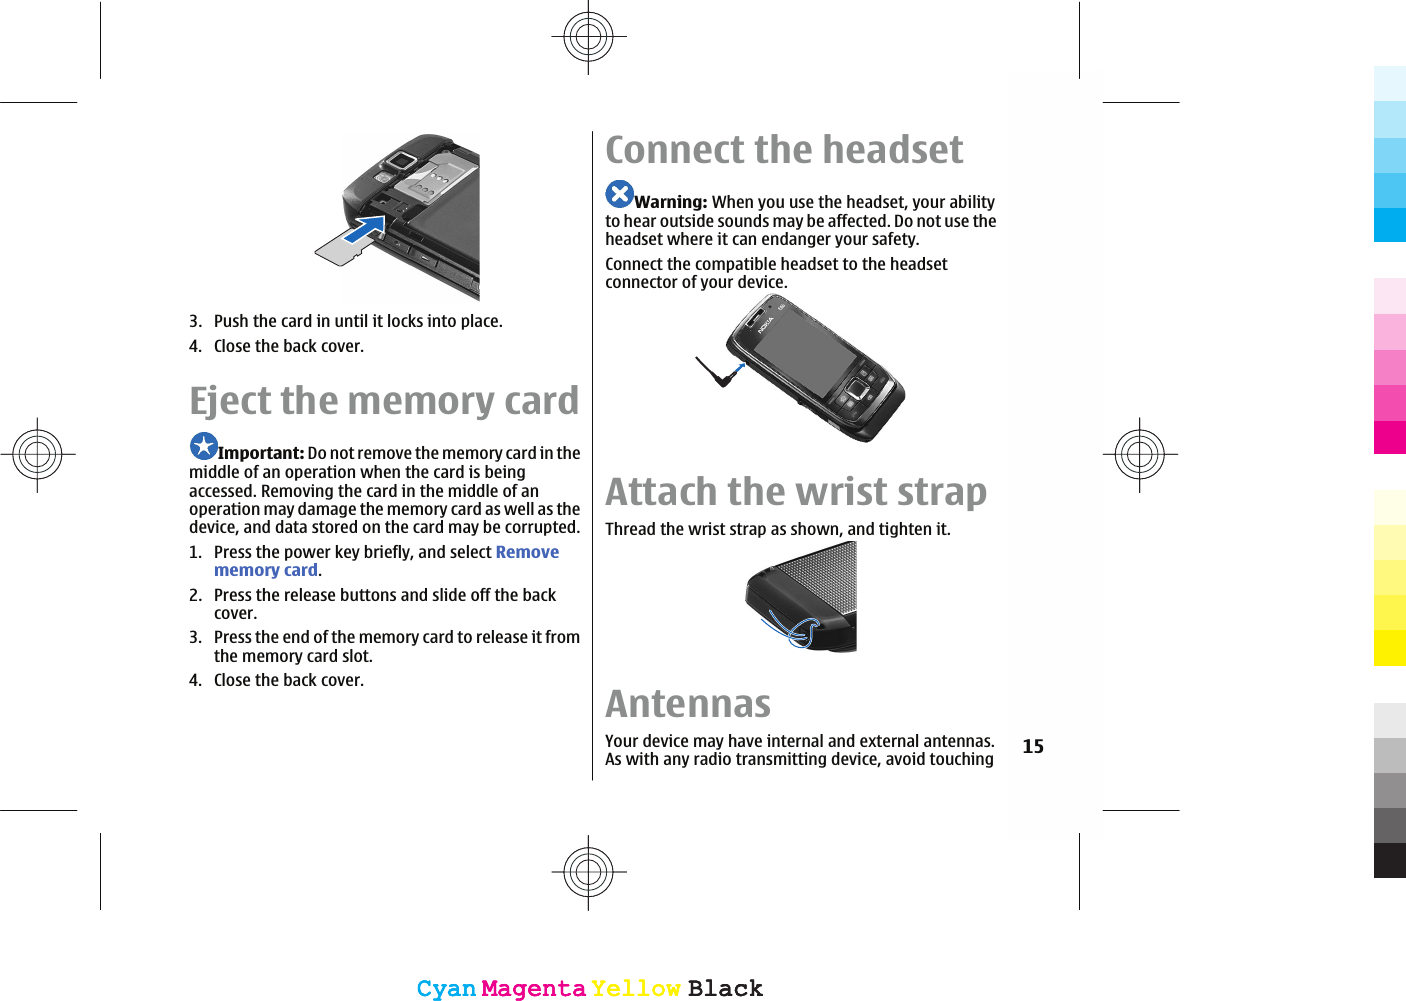 3. Push the card in until it locks into place.4. Close the back cover.Eject the memory cardImportant: Do not remove the memory card in themiddle of an operation when the card is beingaccessed. Removing the card in the middle of anoperation may damage the memory card as well as thedevice, and data stored on the card may be corrupted.1. Press the power key briefly, and select Removememory card.2. Press the release buttons and slide off the backcover.3. Press the end of the memory card to release it fromthe memory card slot.4. Close the back cover.Connect the headsetWarning: When you use the headset, your abilityto hear outside sounds may be affected. Do not use theheadset where it can endanger your safety.Connect the compatible headset to the headsetconnector of your device.Attach the wrist strapThread the wrist strap as shown, and tighten it.AntennasYour device may have internal and external antennas.As with any radio transmitting device, avoid touching 15CyanCyanMagentaMagentaYellowYellowBlackBlackCyanCyanMagentaMagentaYellowYellowBlackBlack